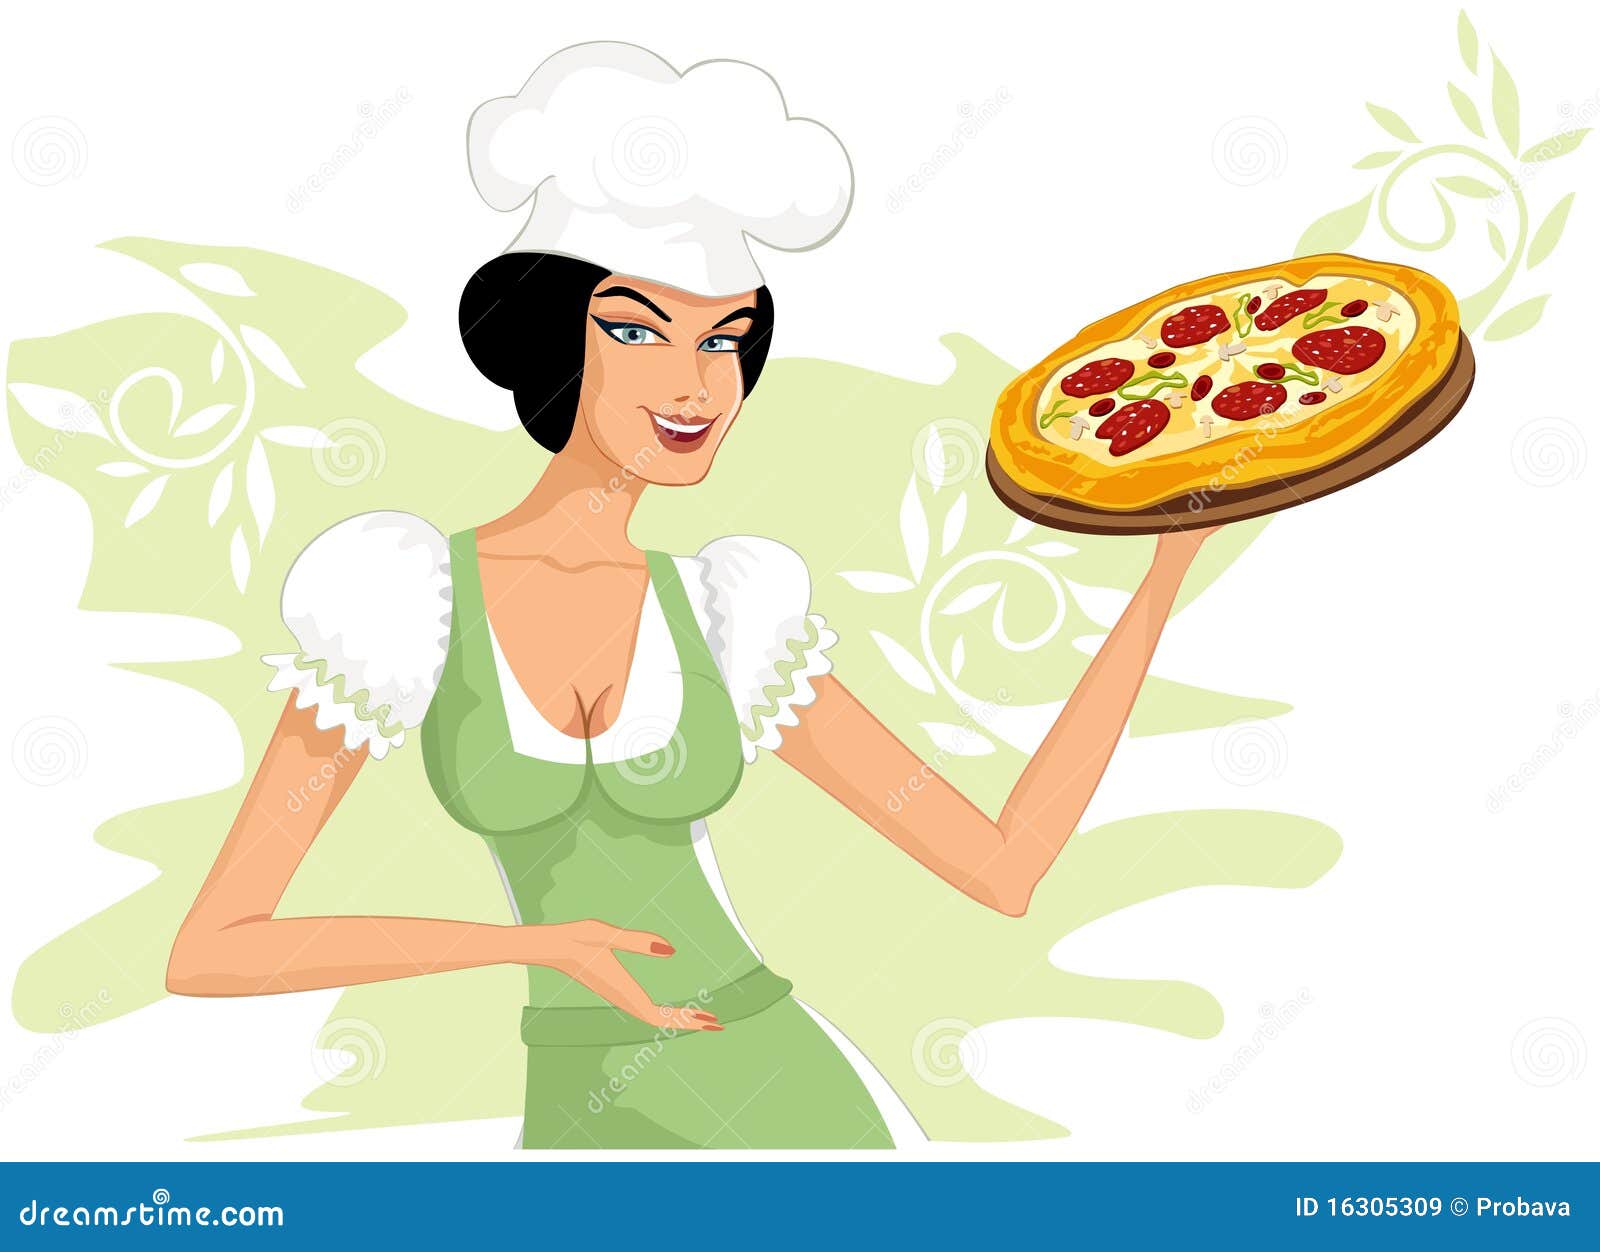 Woman with a pizza stock vector. Illustration of cheese - 16305309